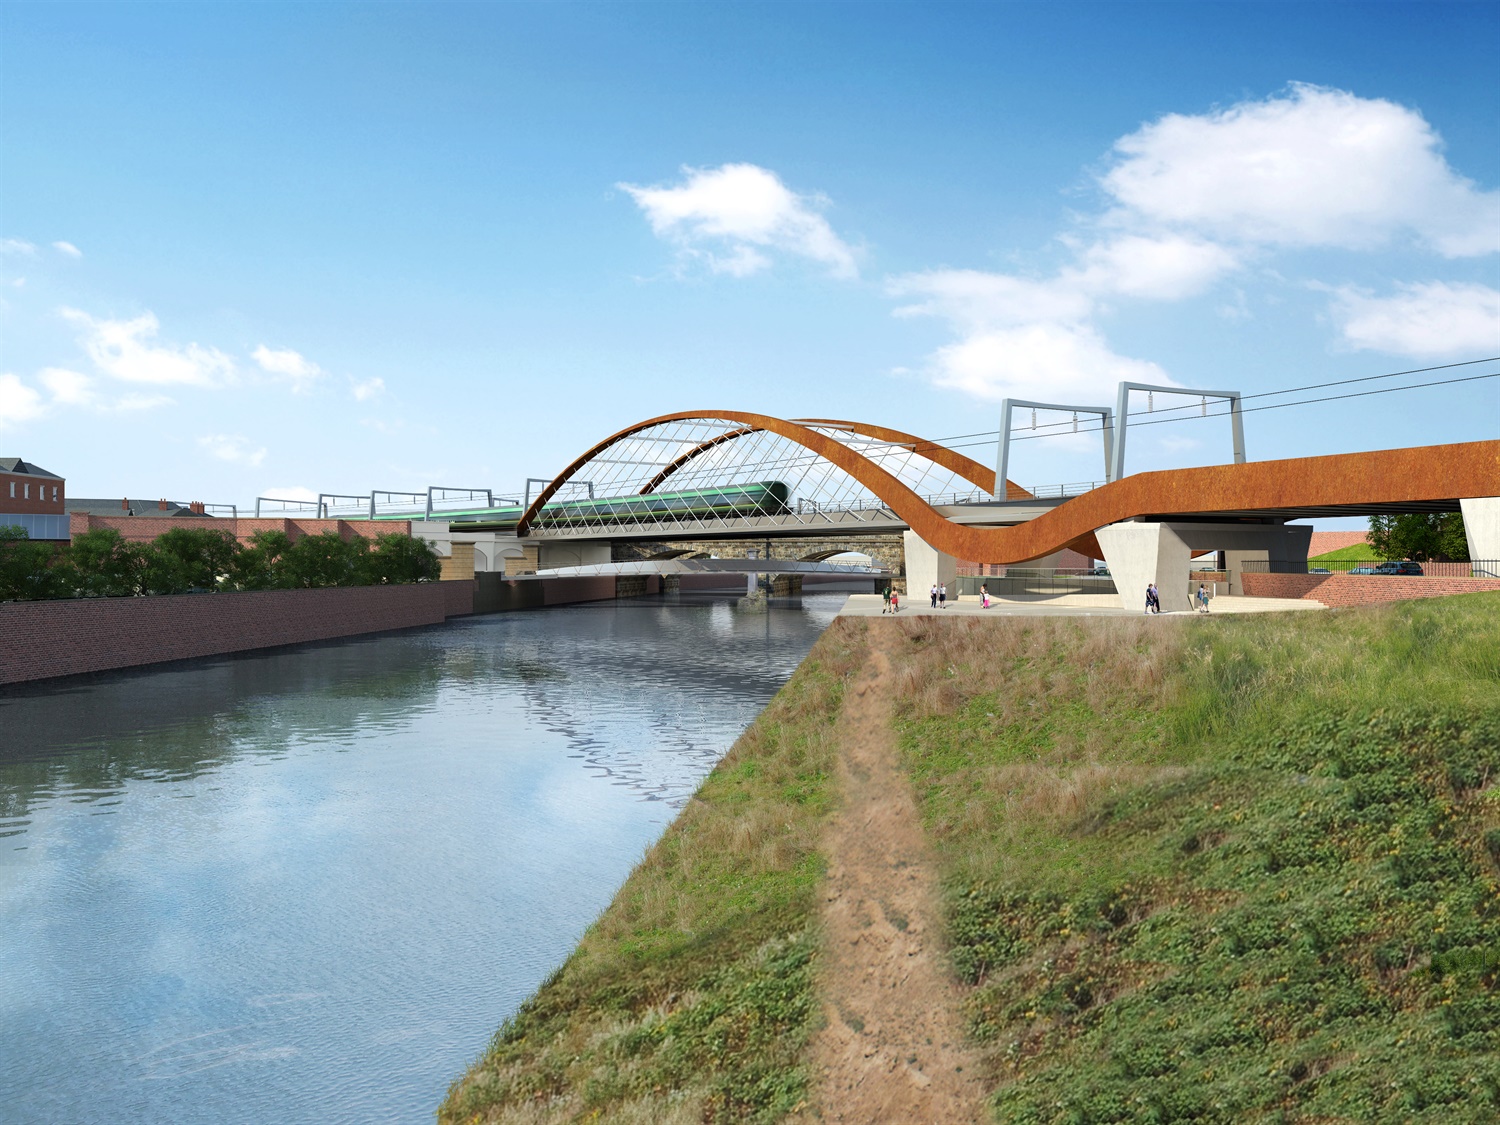 ‘All in it together’ pure alliance nudges Ordsall Chord to final phase